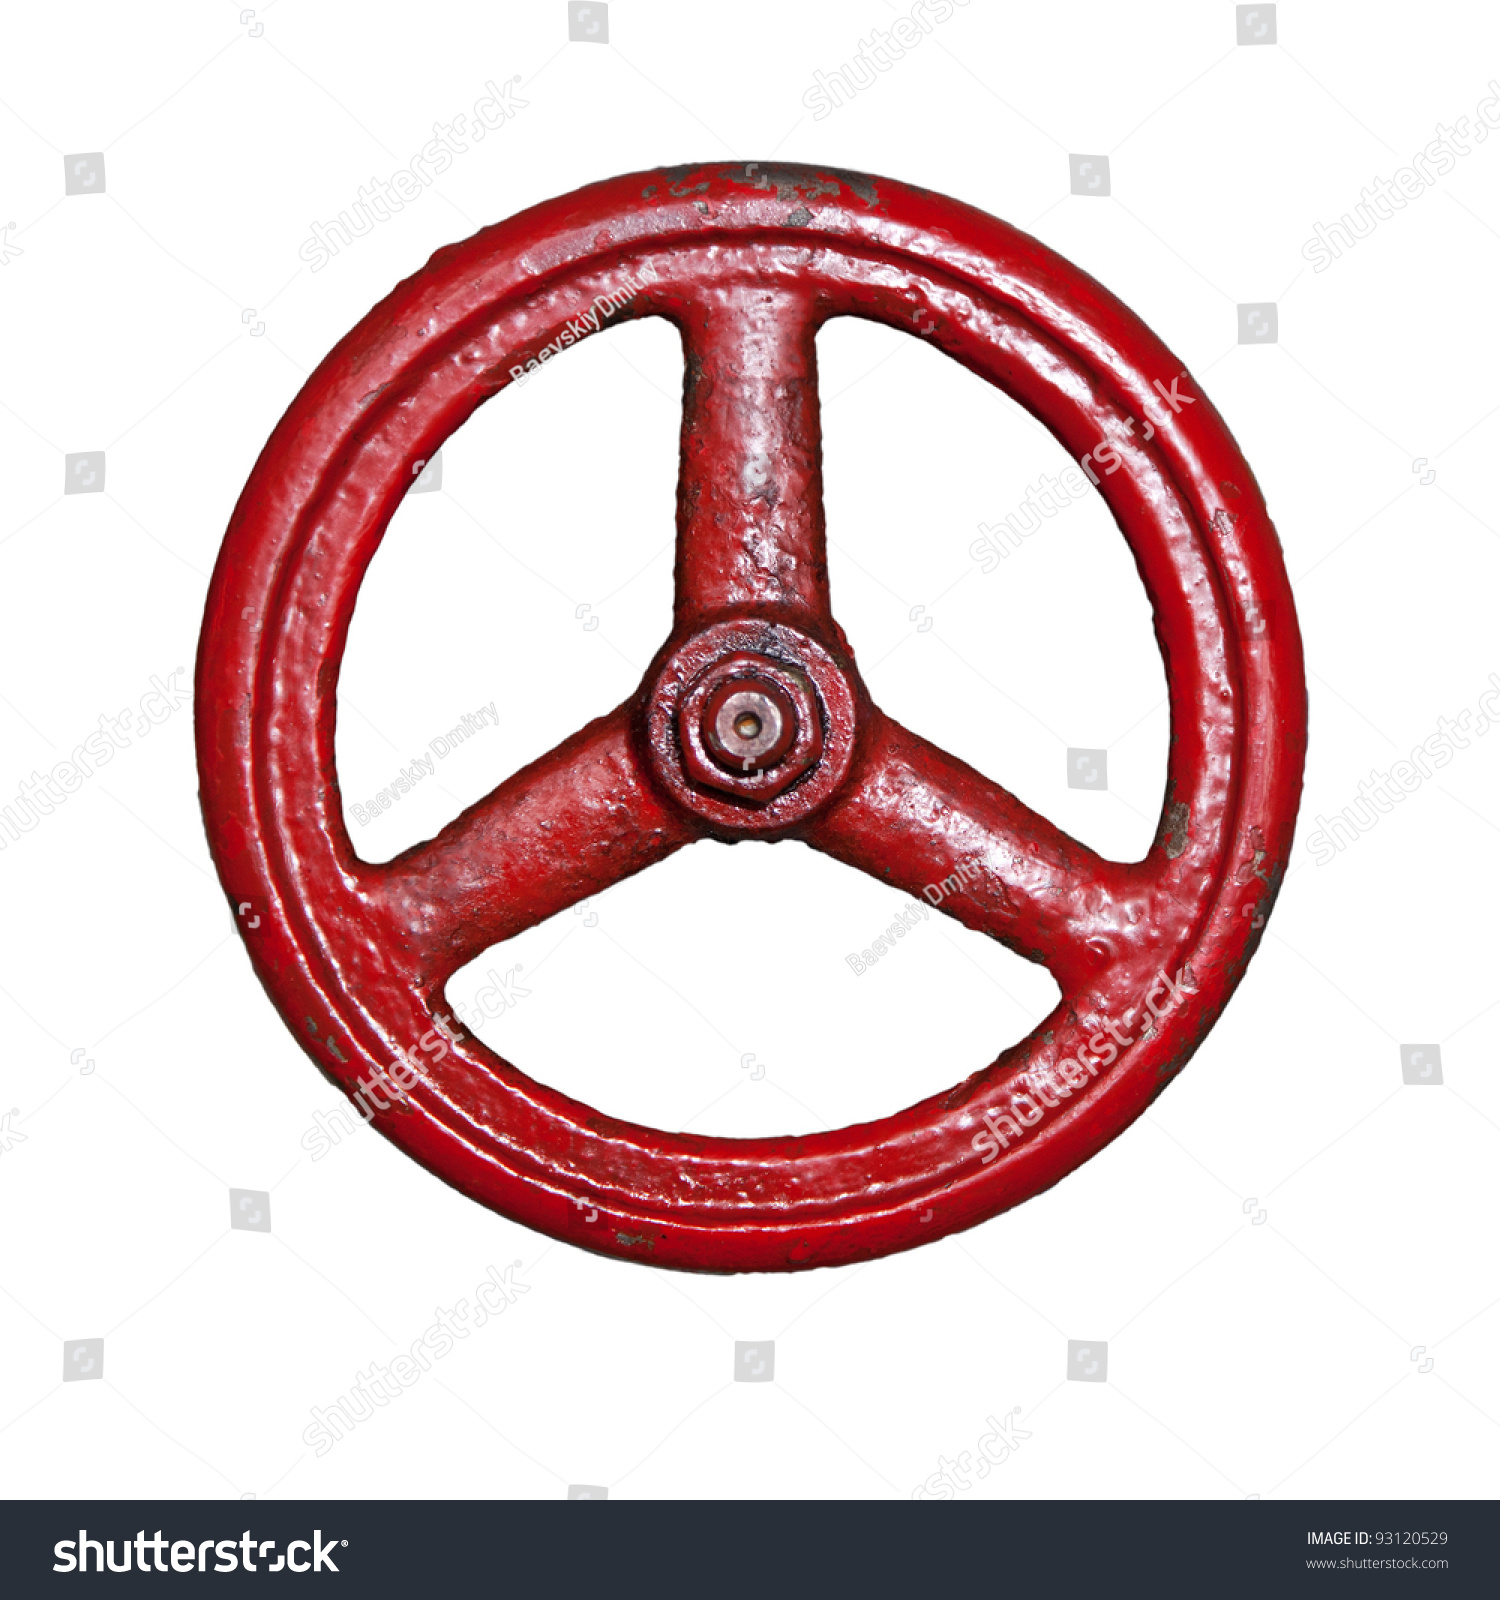 Old Red Valve On White Stock Photo 93120529 - Shutterstock